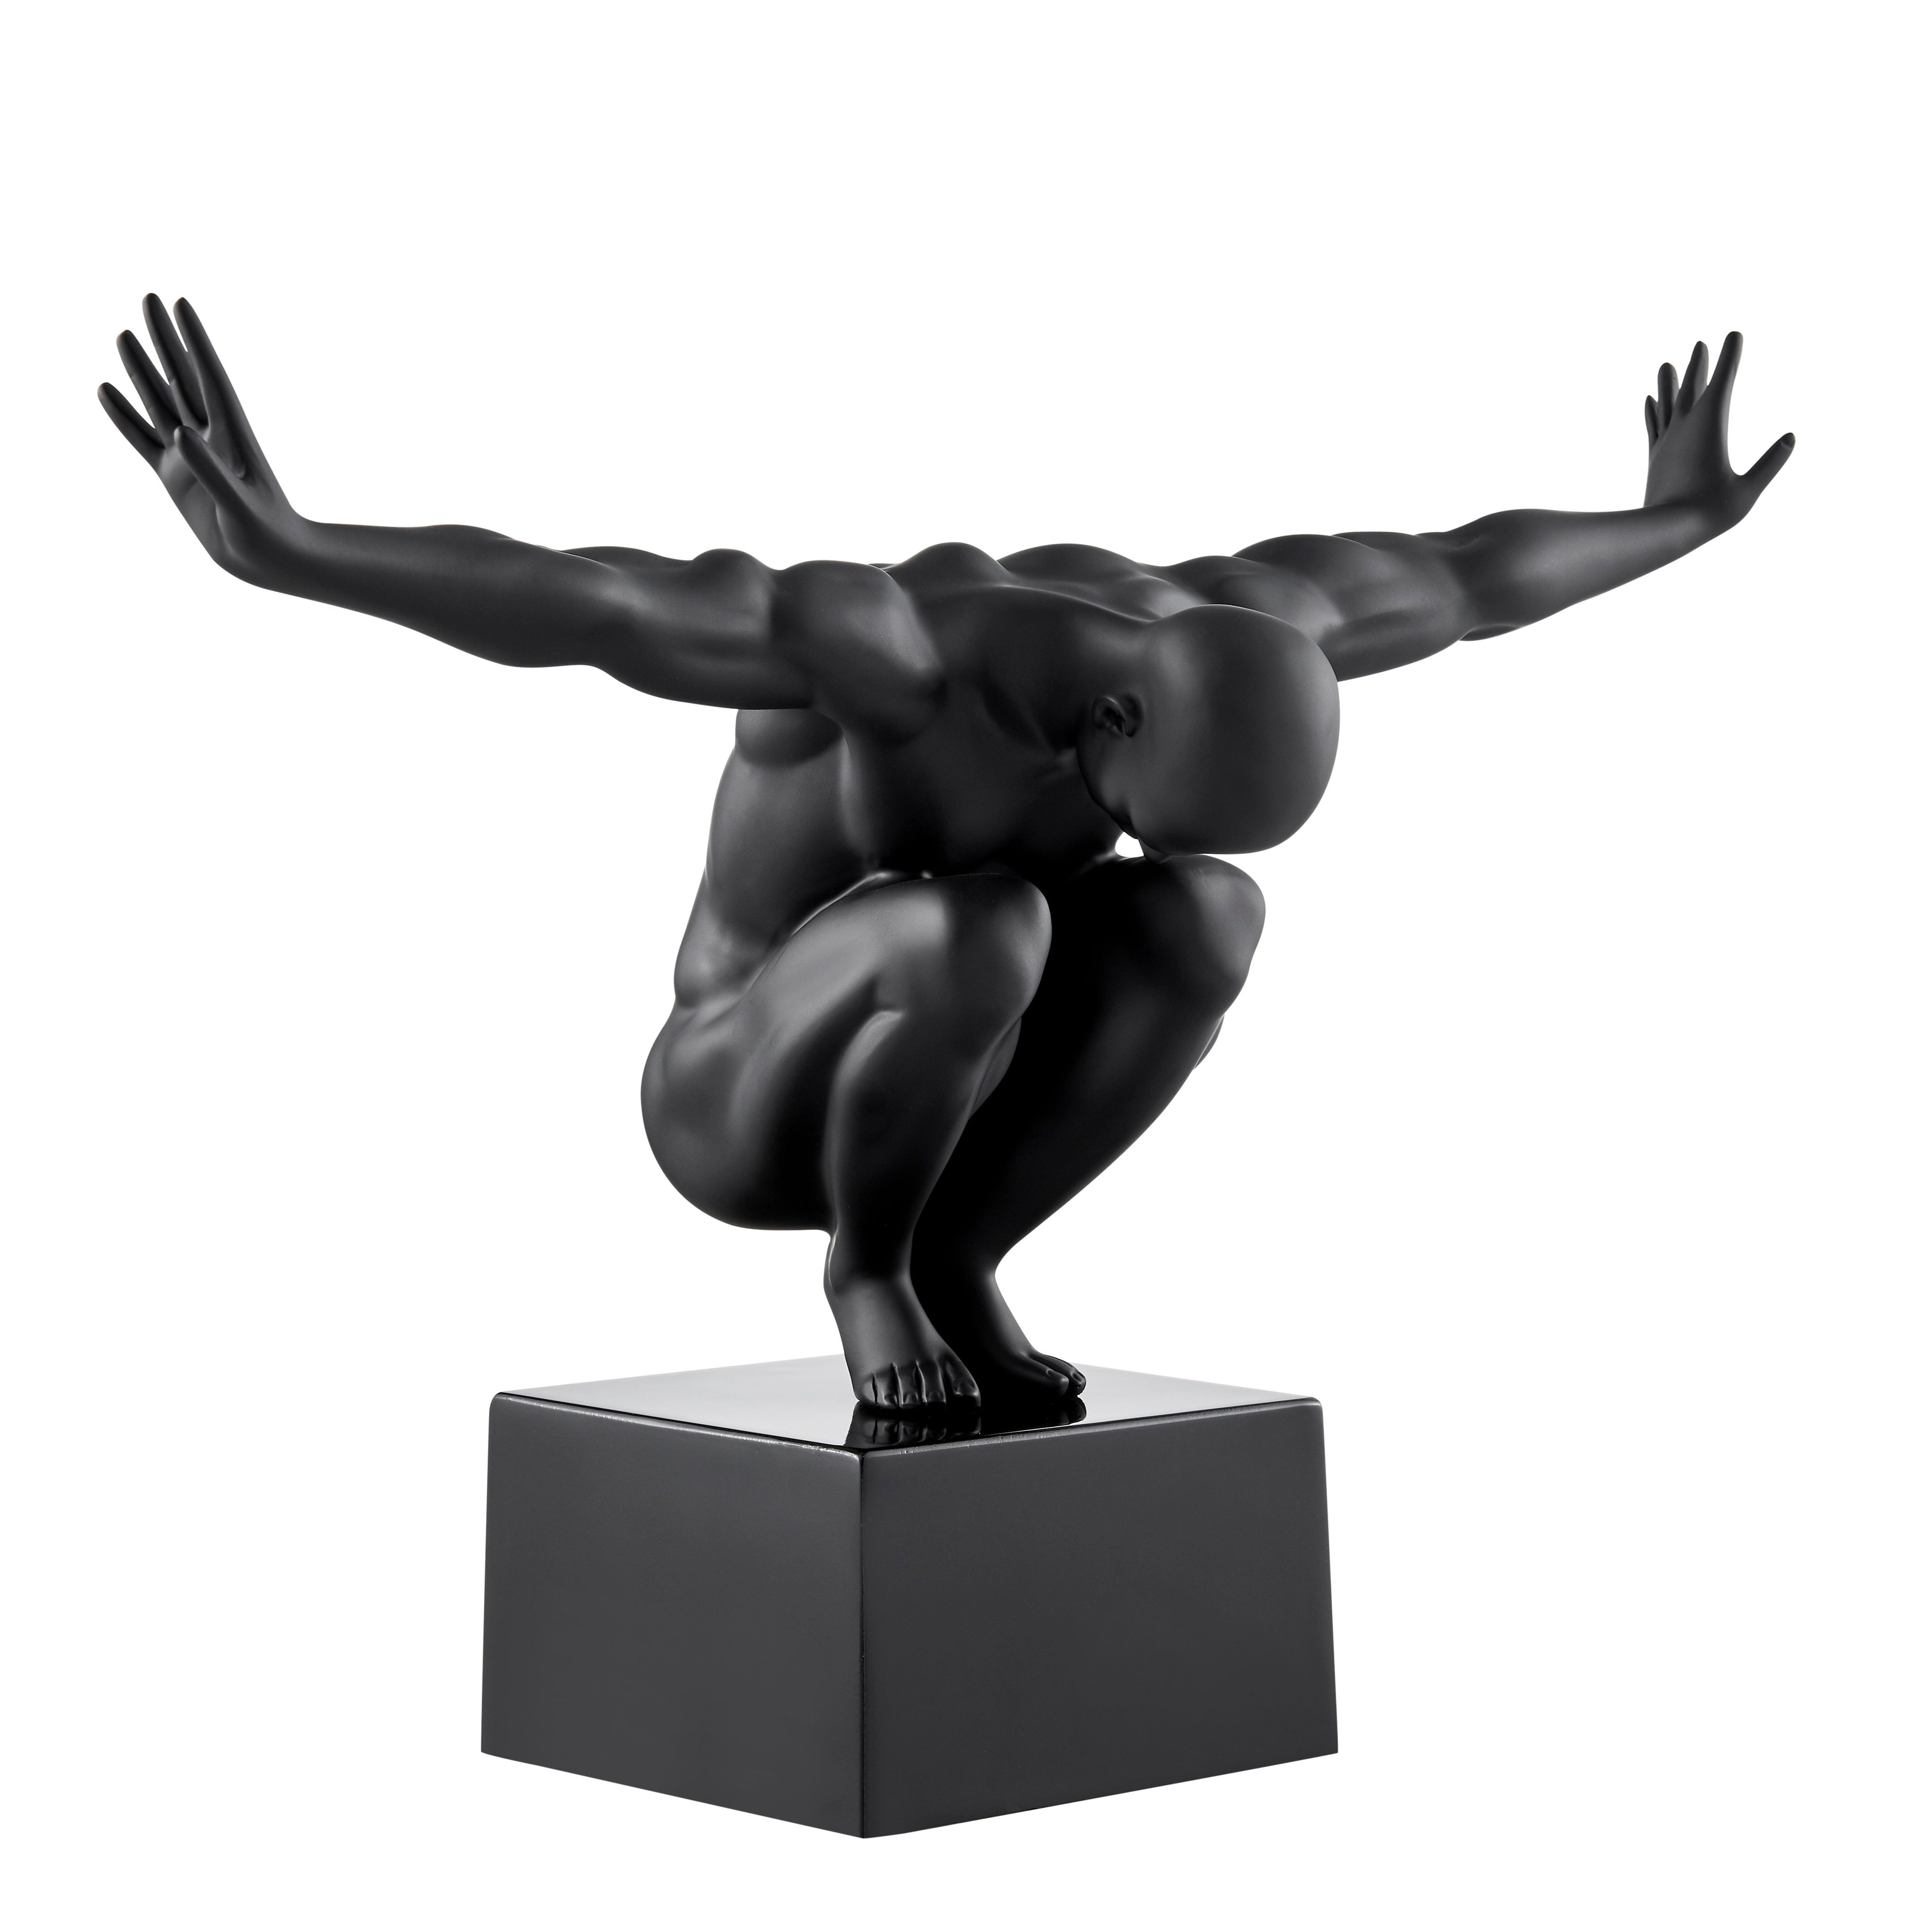 Gifts for Him - Strong Man / Body Builder Statue - Steelman